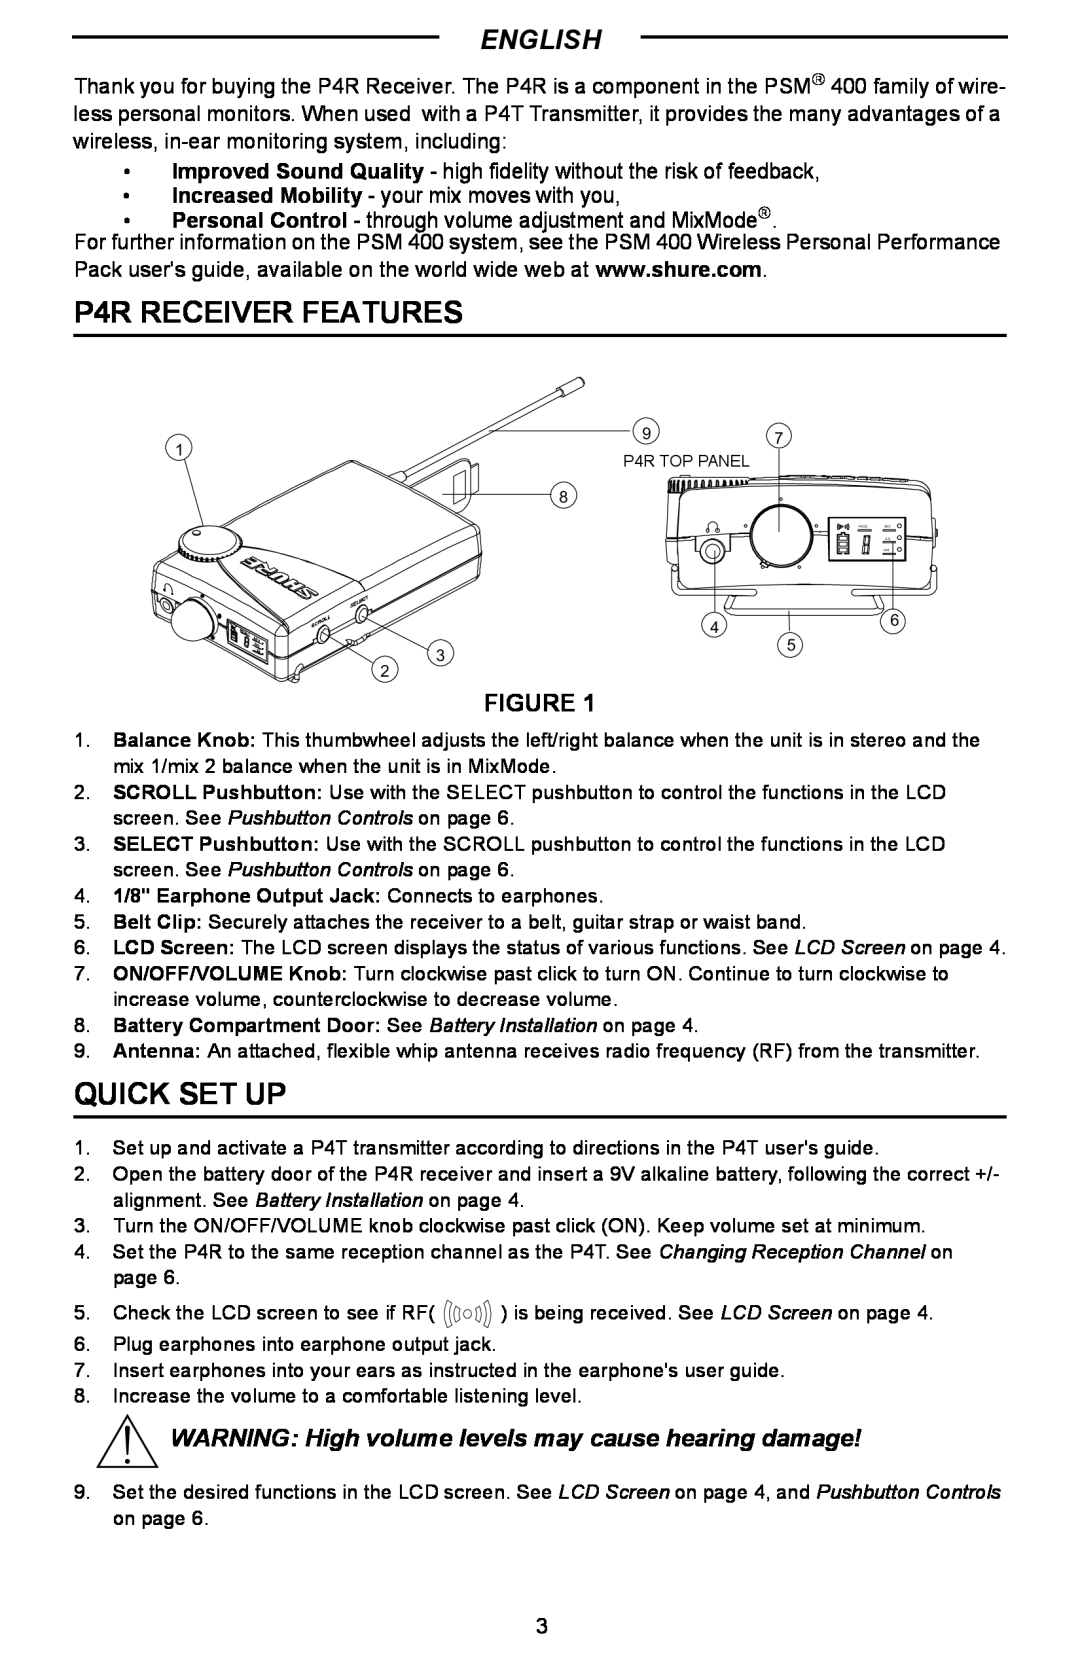 Shure manual P4R RECEIVER FEATURES, Quick Set Up, English 